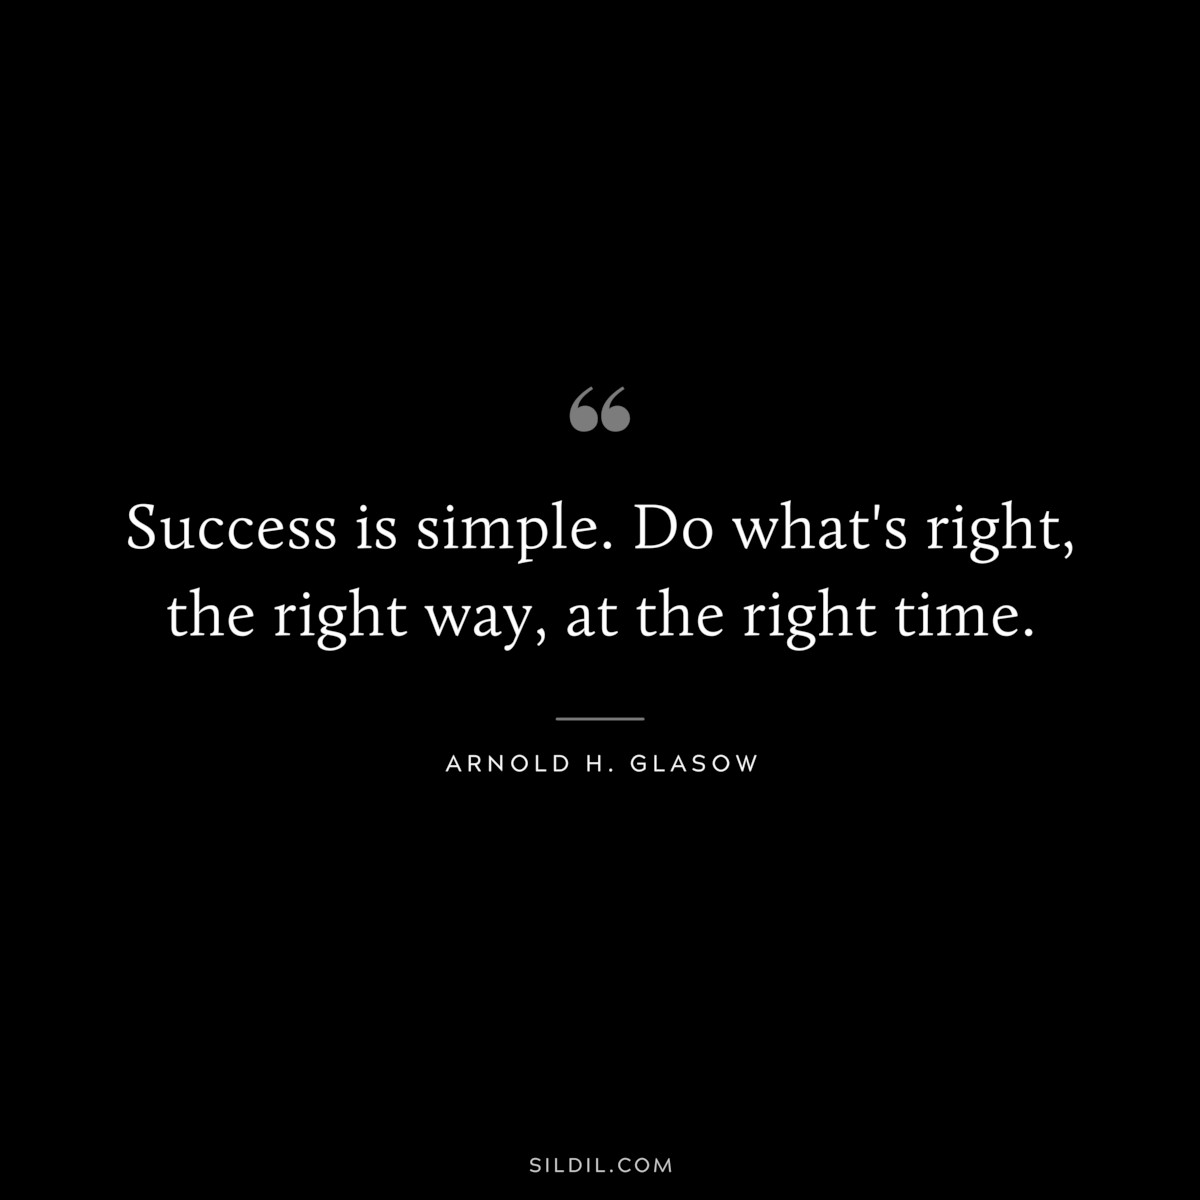 Success is simple. Do what's right, the right way, at the right time. ― Arnold H. Glasow 